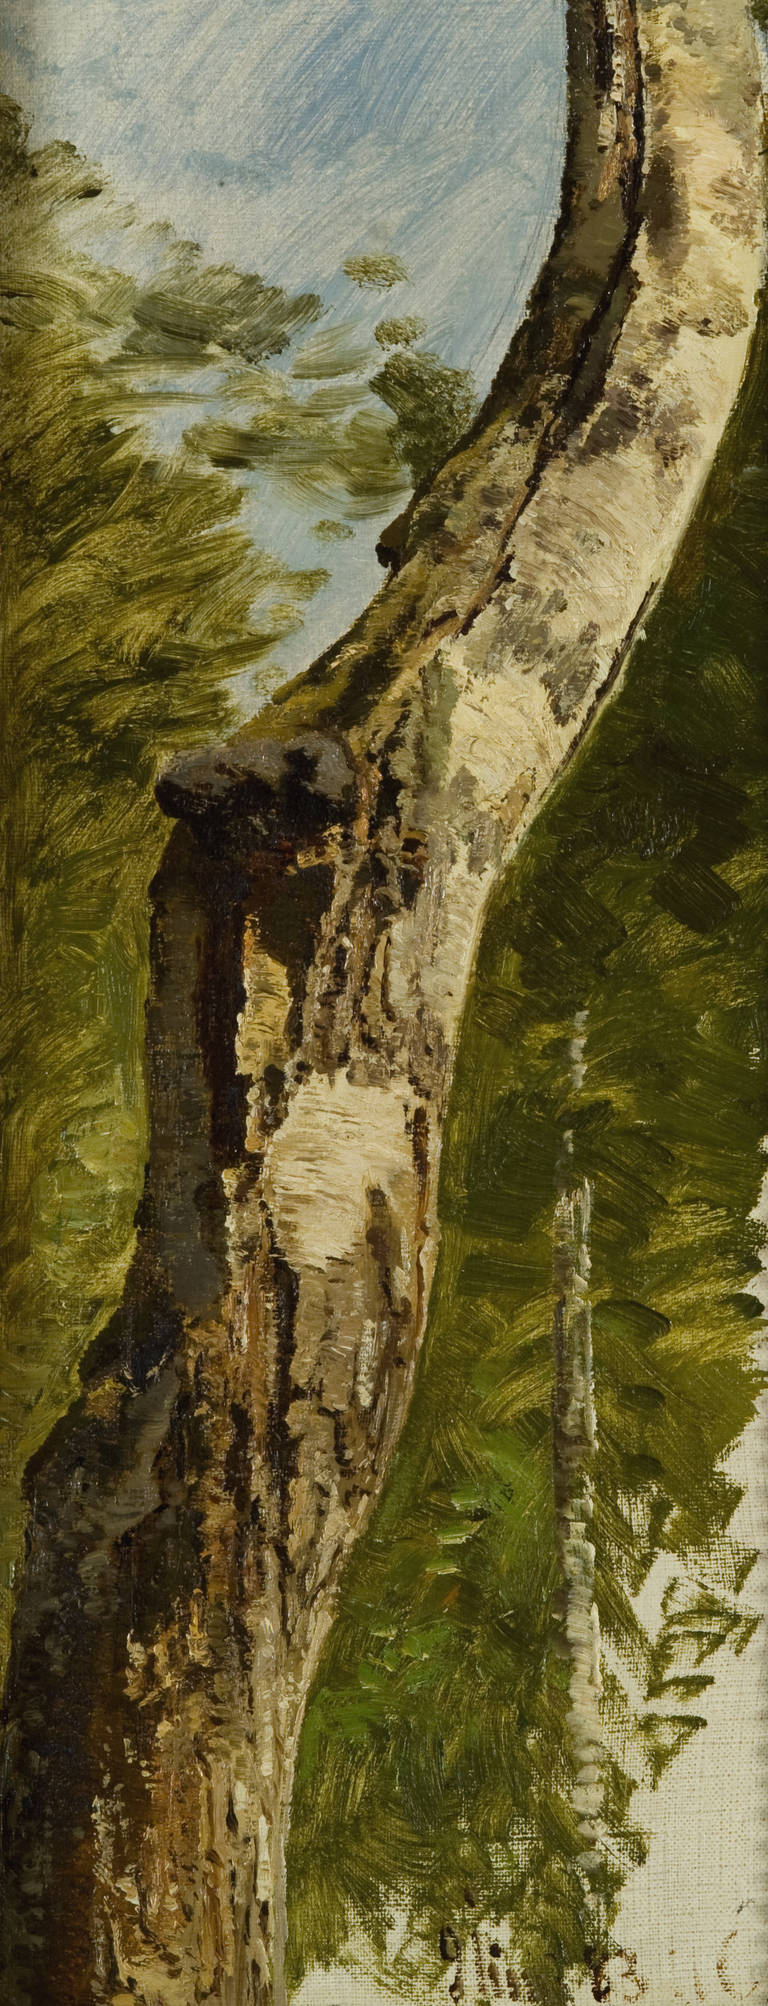 Janus La Cour Still-Life Painting - Study of a branch